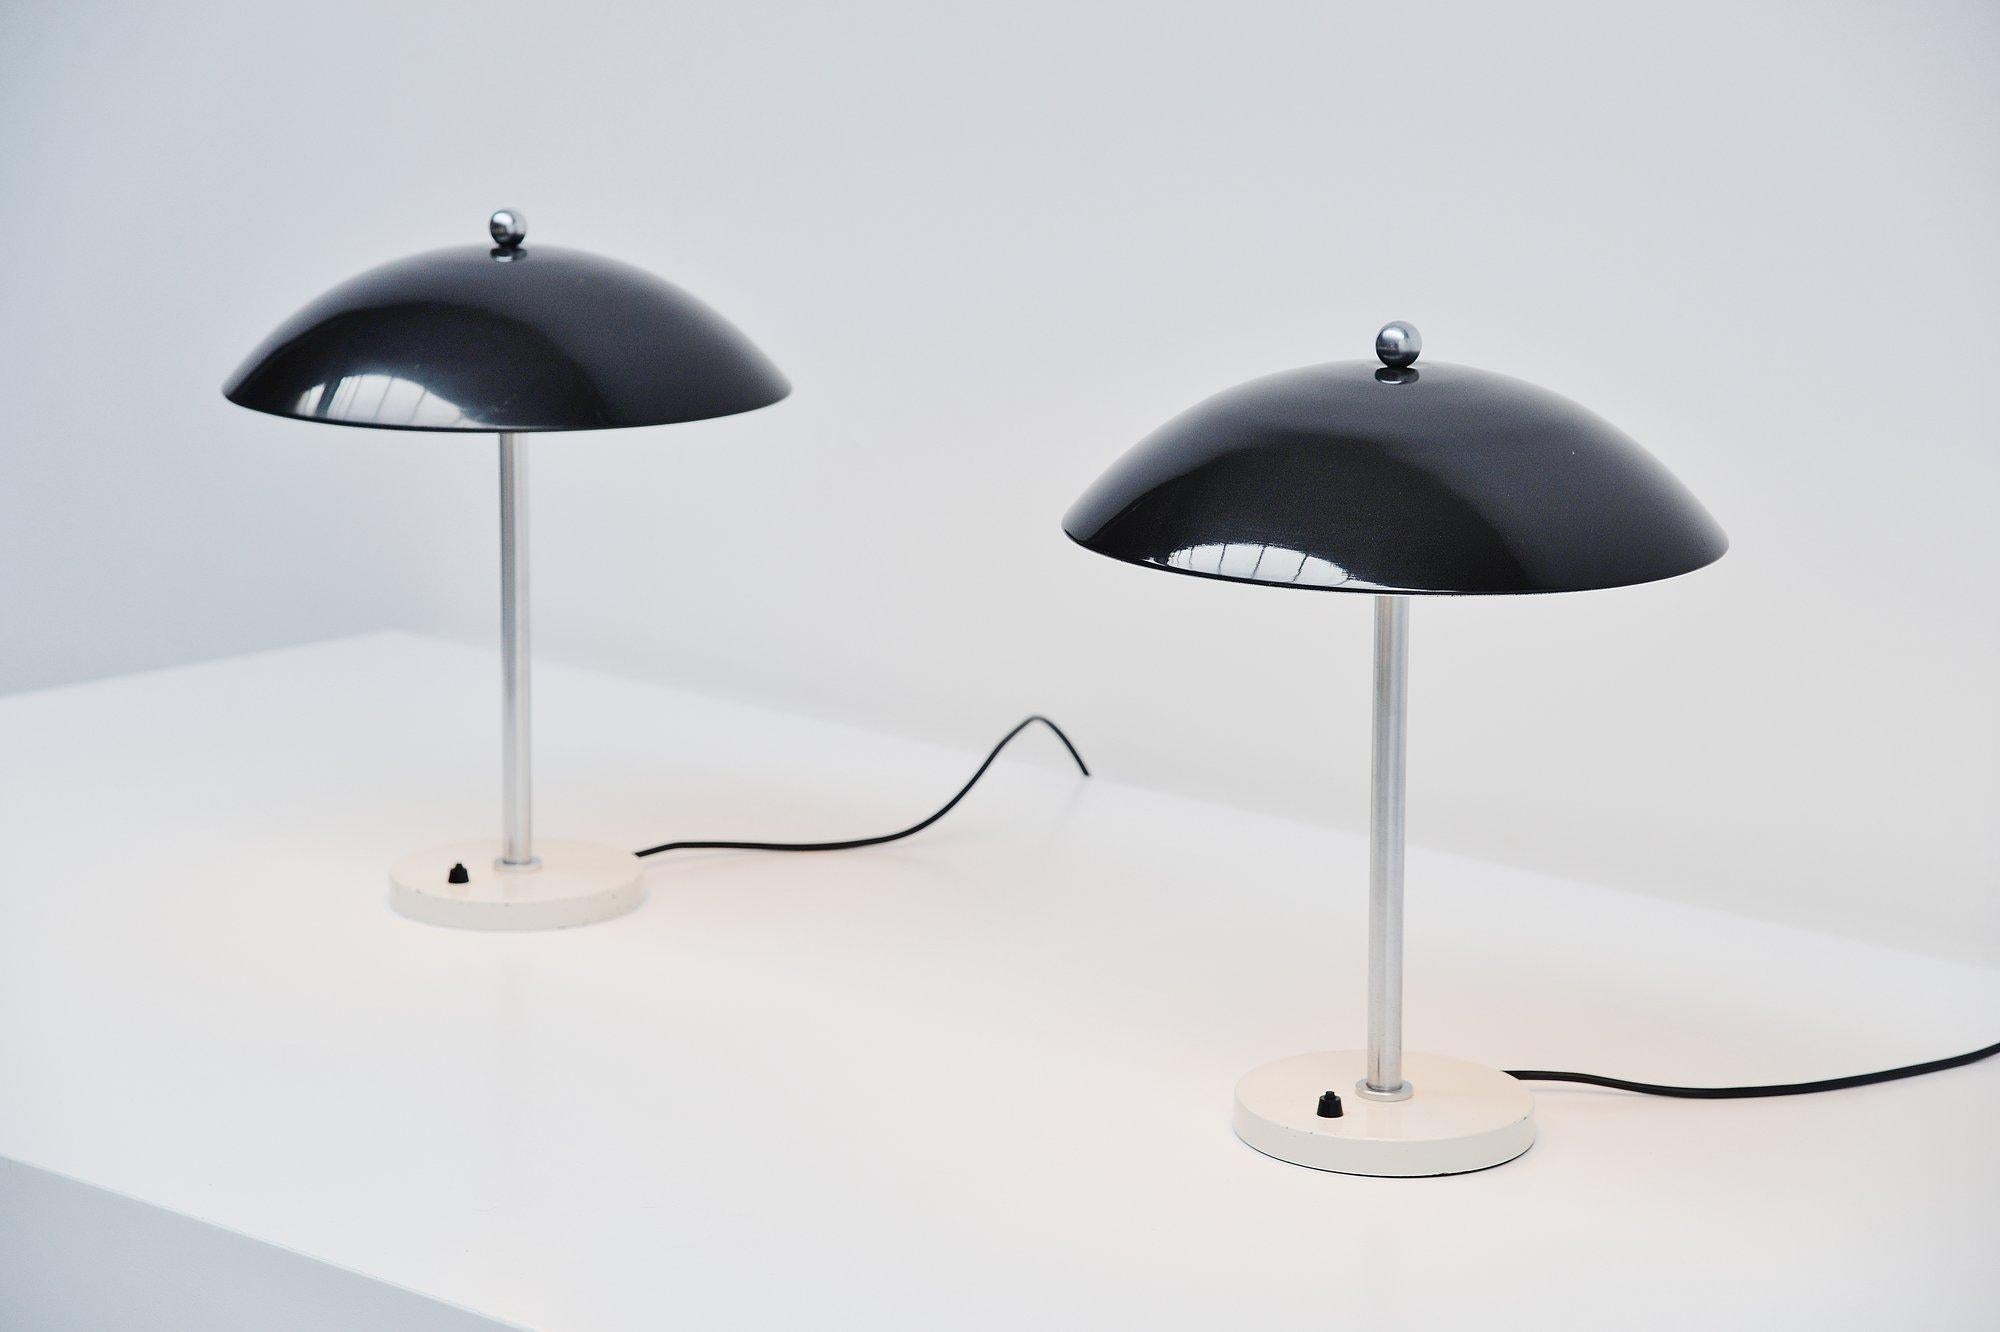 Very nice mushroom shaped table lamp pair model 5015 designed by Wim Rietveld and manufactured by Gispen Culemborg, Holland 1950. These lamps have a round weighted base, white lacquered with a brushed steel bar, use 2 E27 bulbs up to 60 watt each